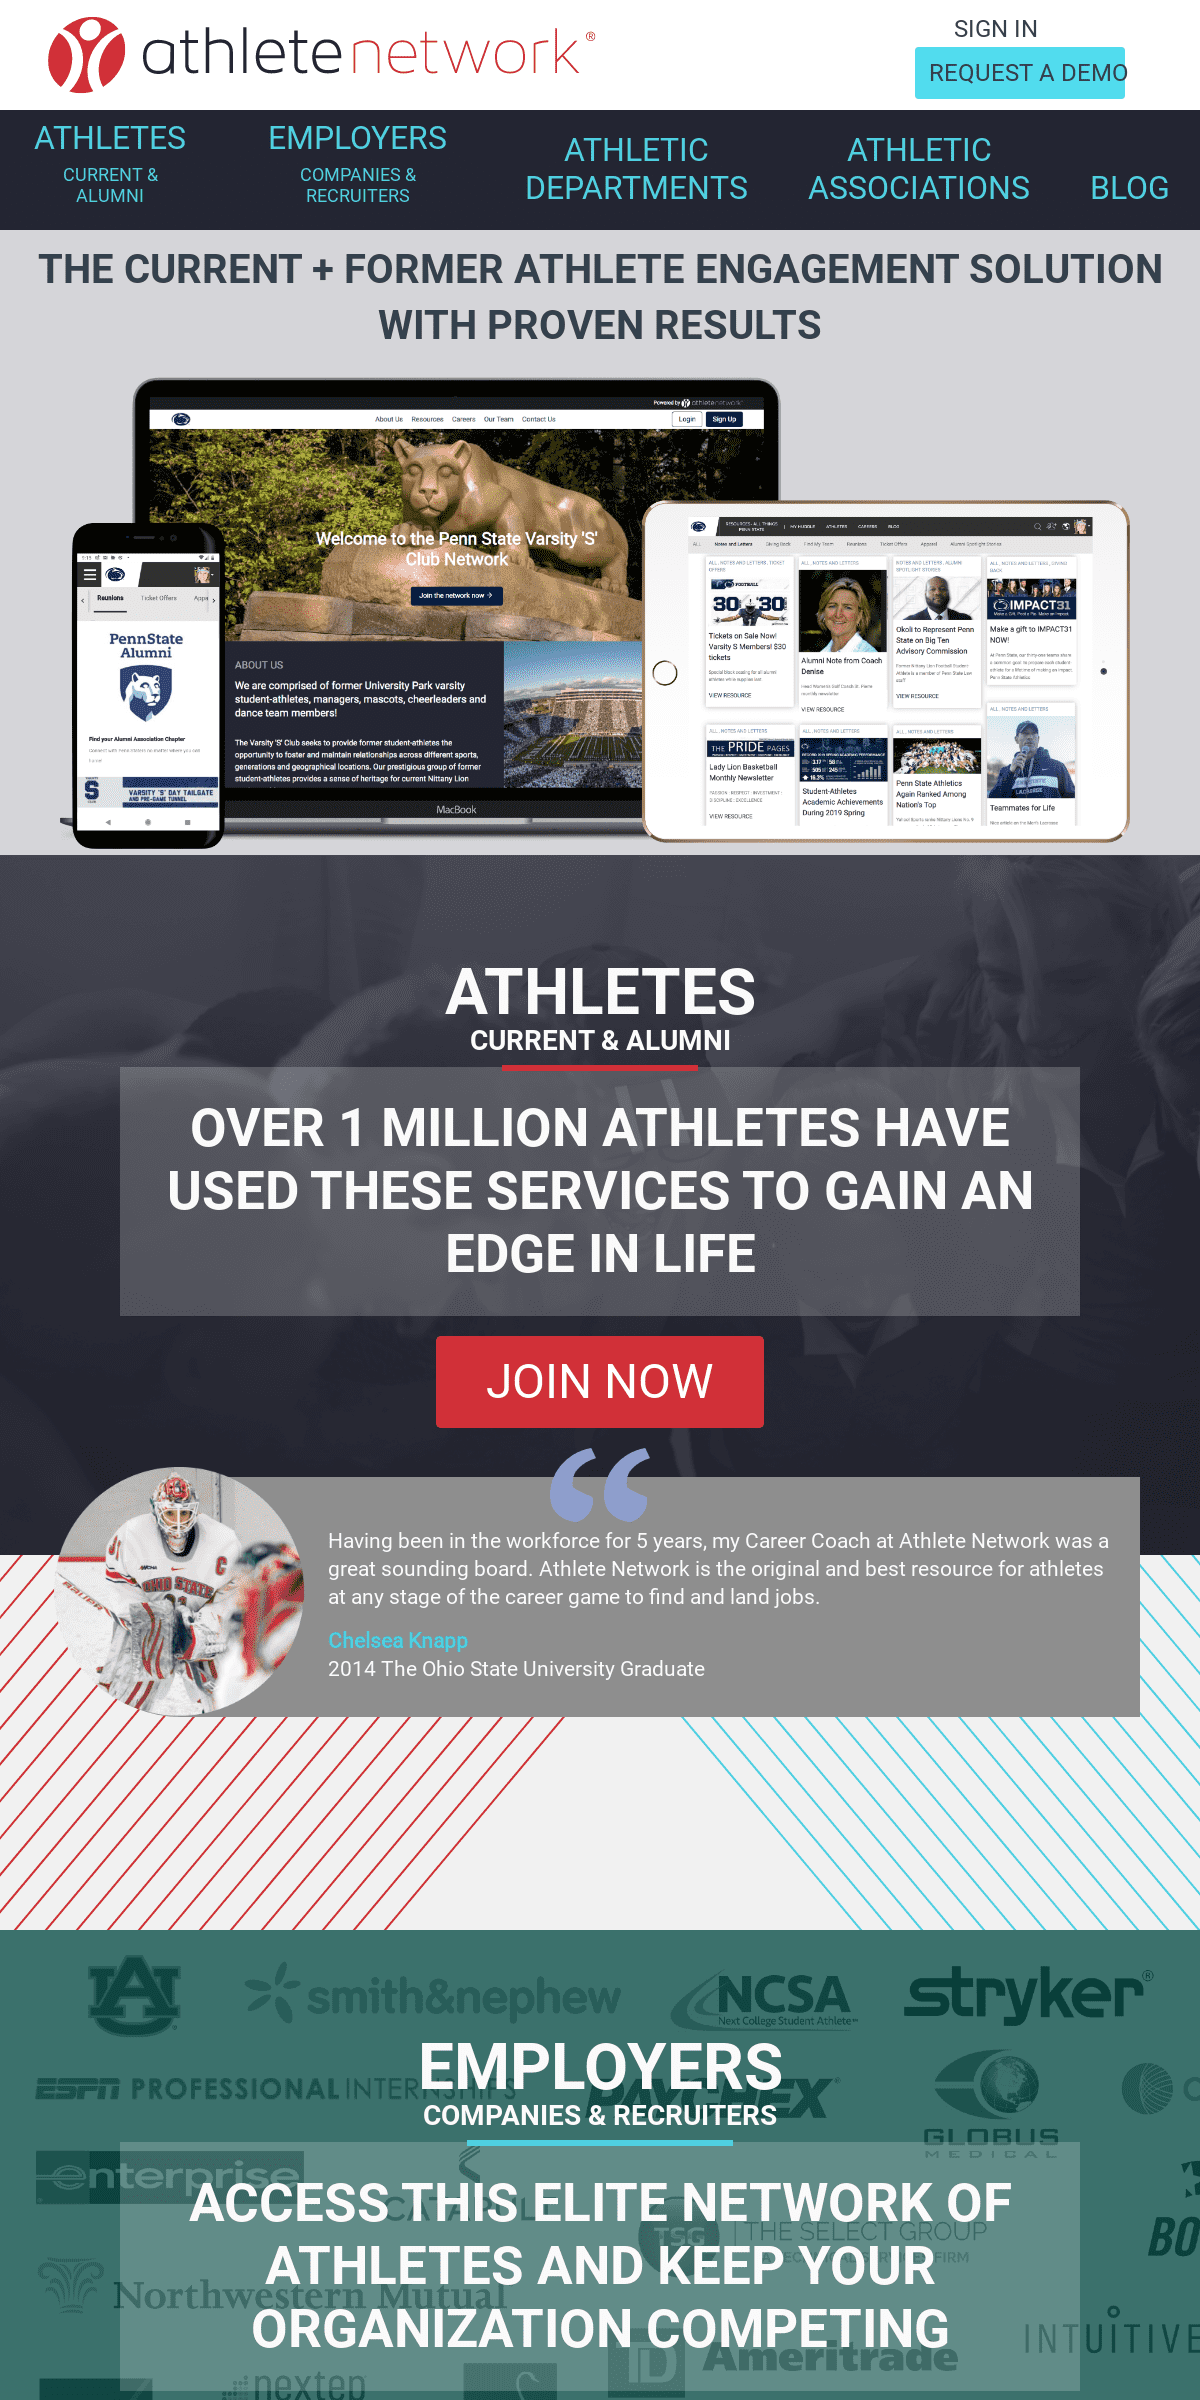 A complete backup of athletenetwork.com